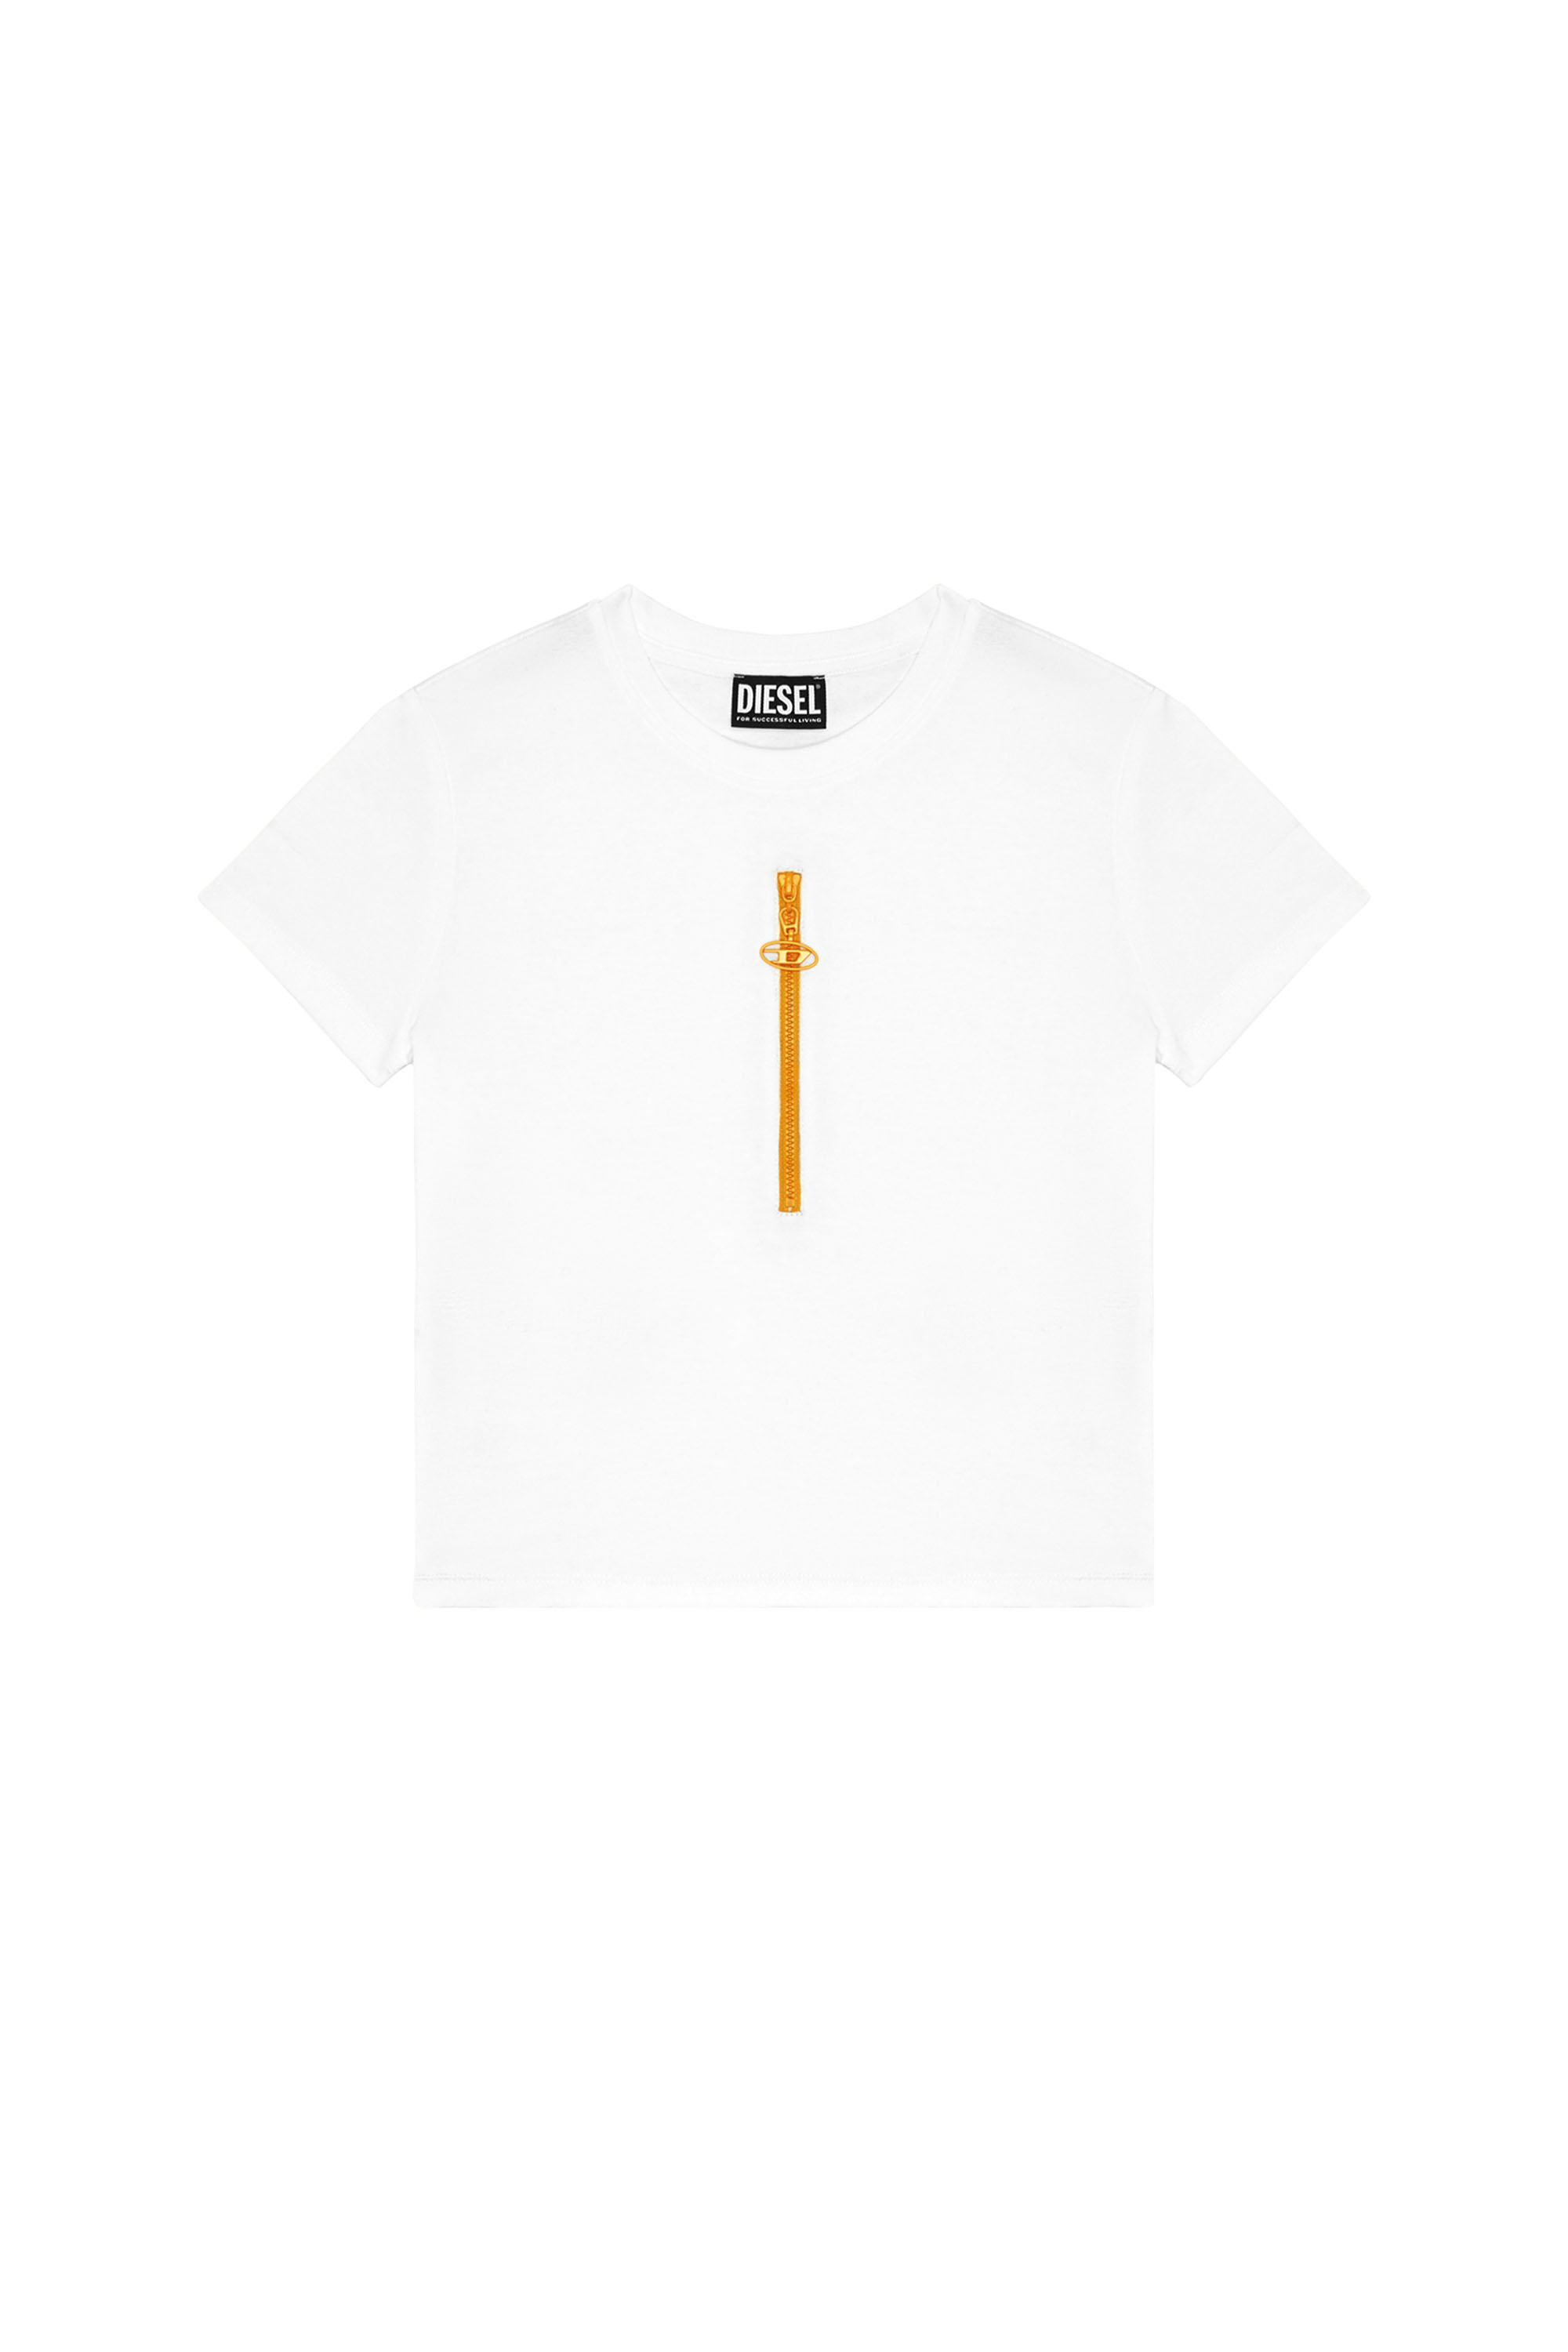 Diesel - T-VAZY, White/Yellow - Image 6